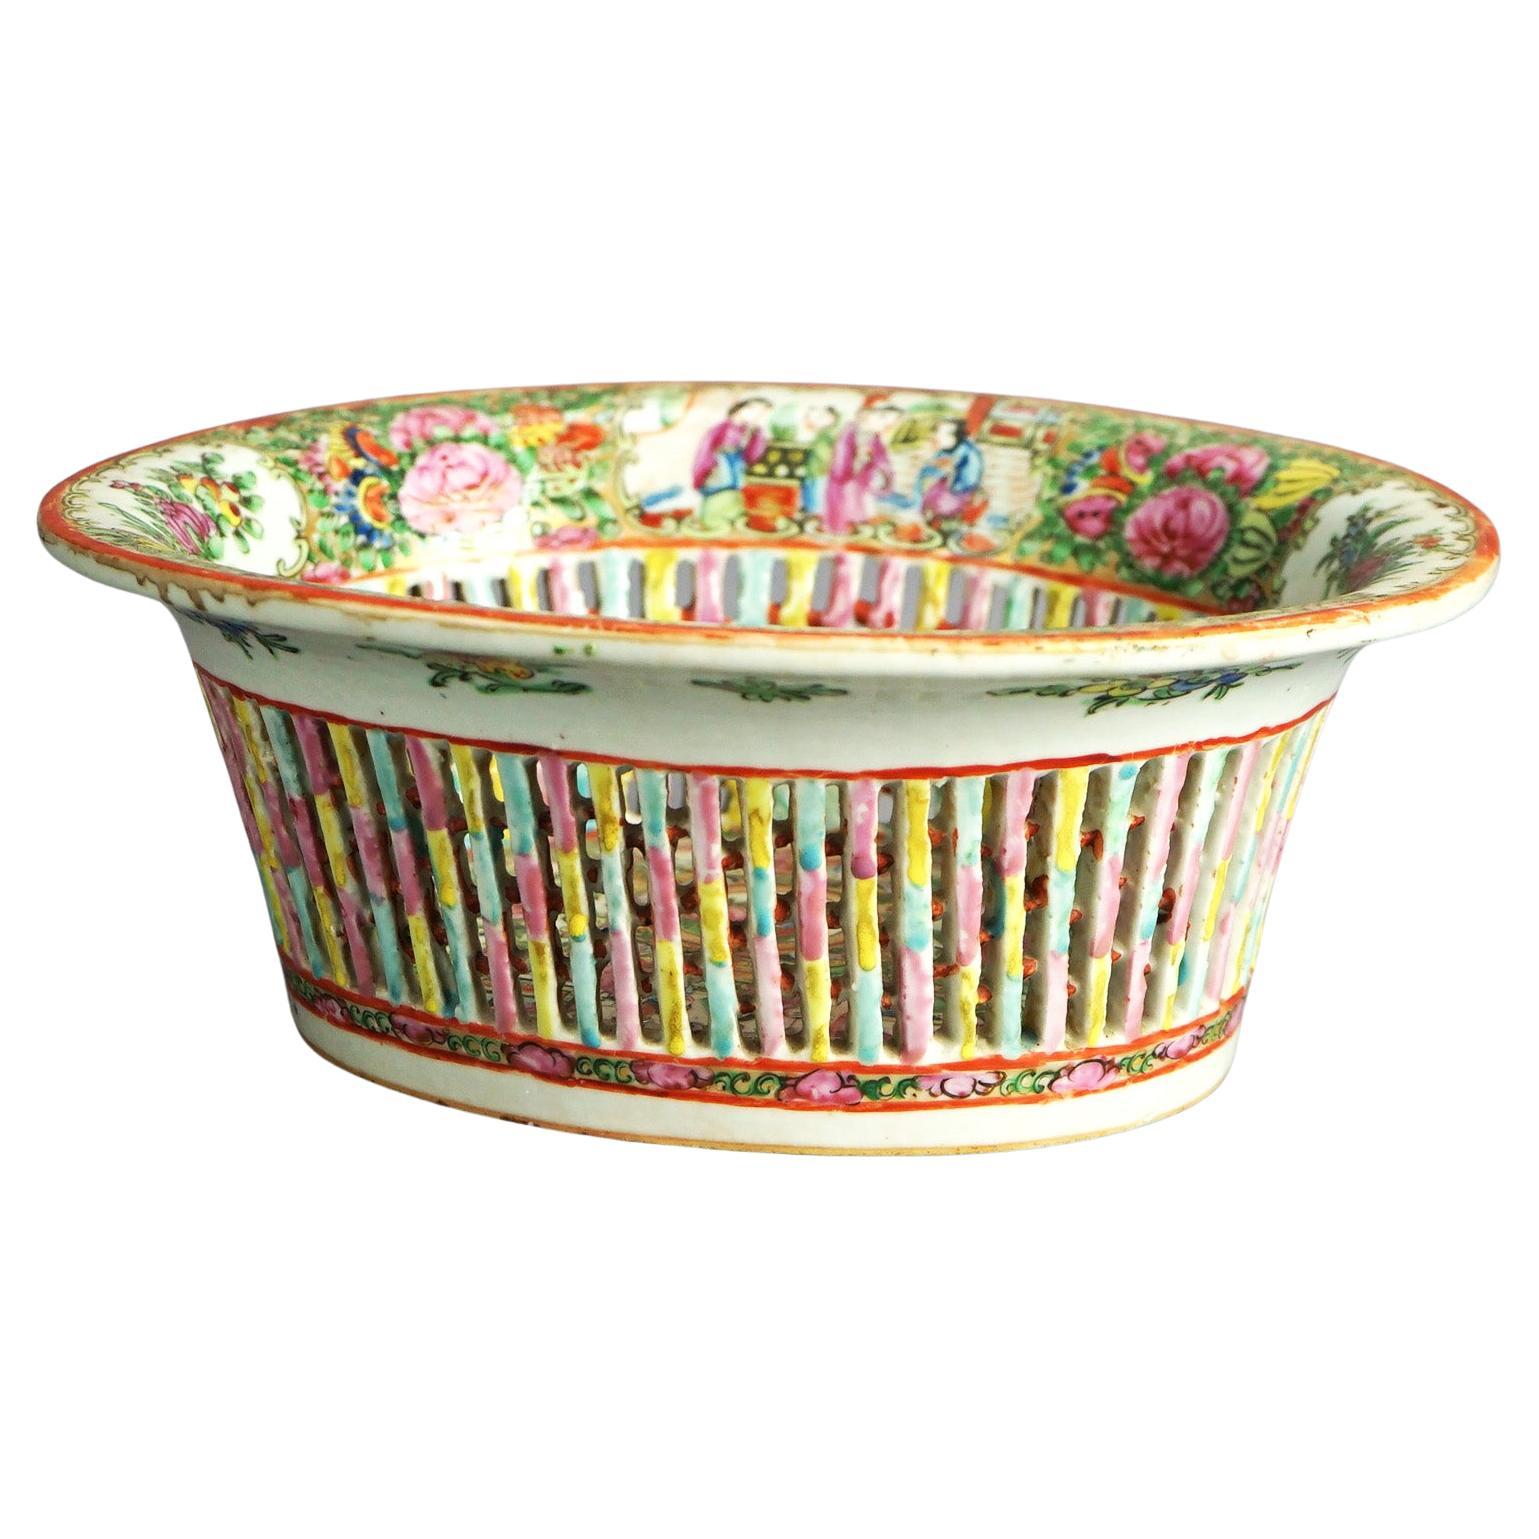 Antique Chinese Rose Medallion Reticulated Porcelain Basket with Hand Painted Garden & Genre Scenes C1900

Measures- 4.25''H x 10.75''W x 9.25''D